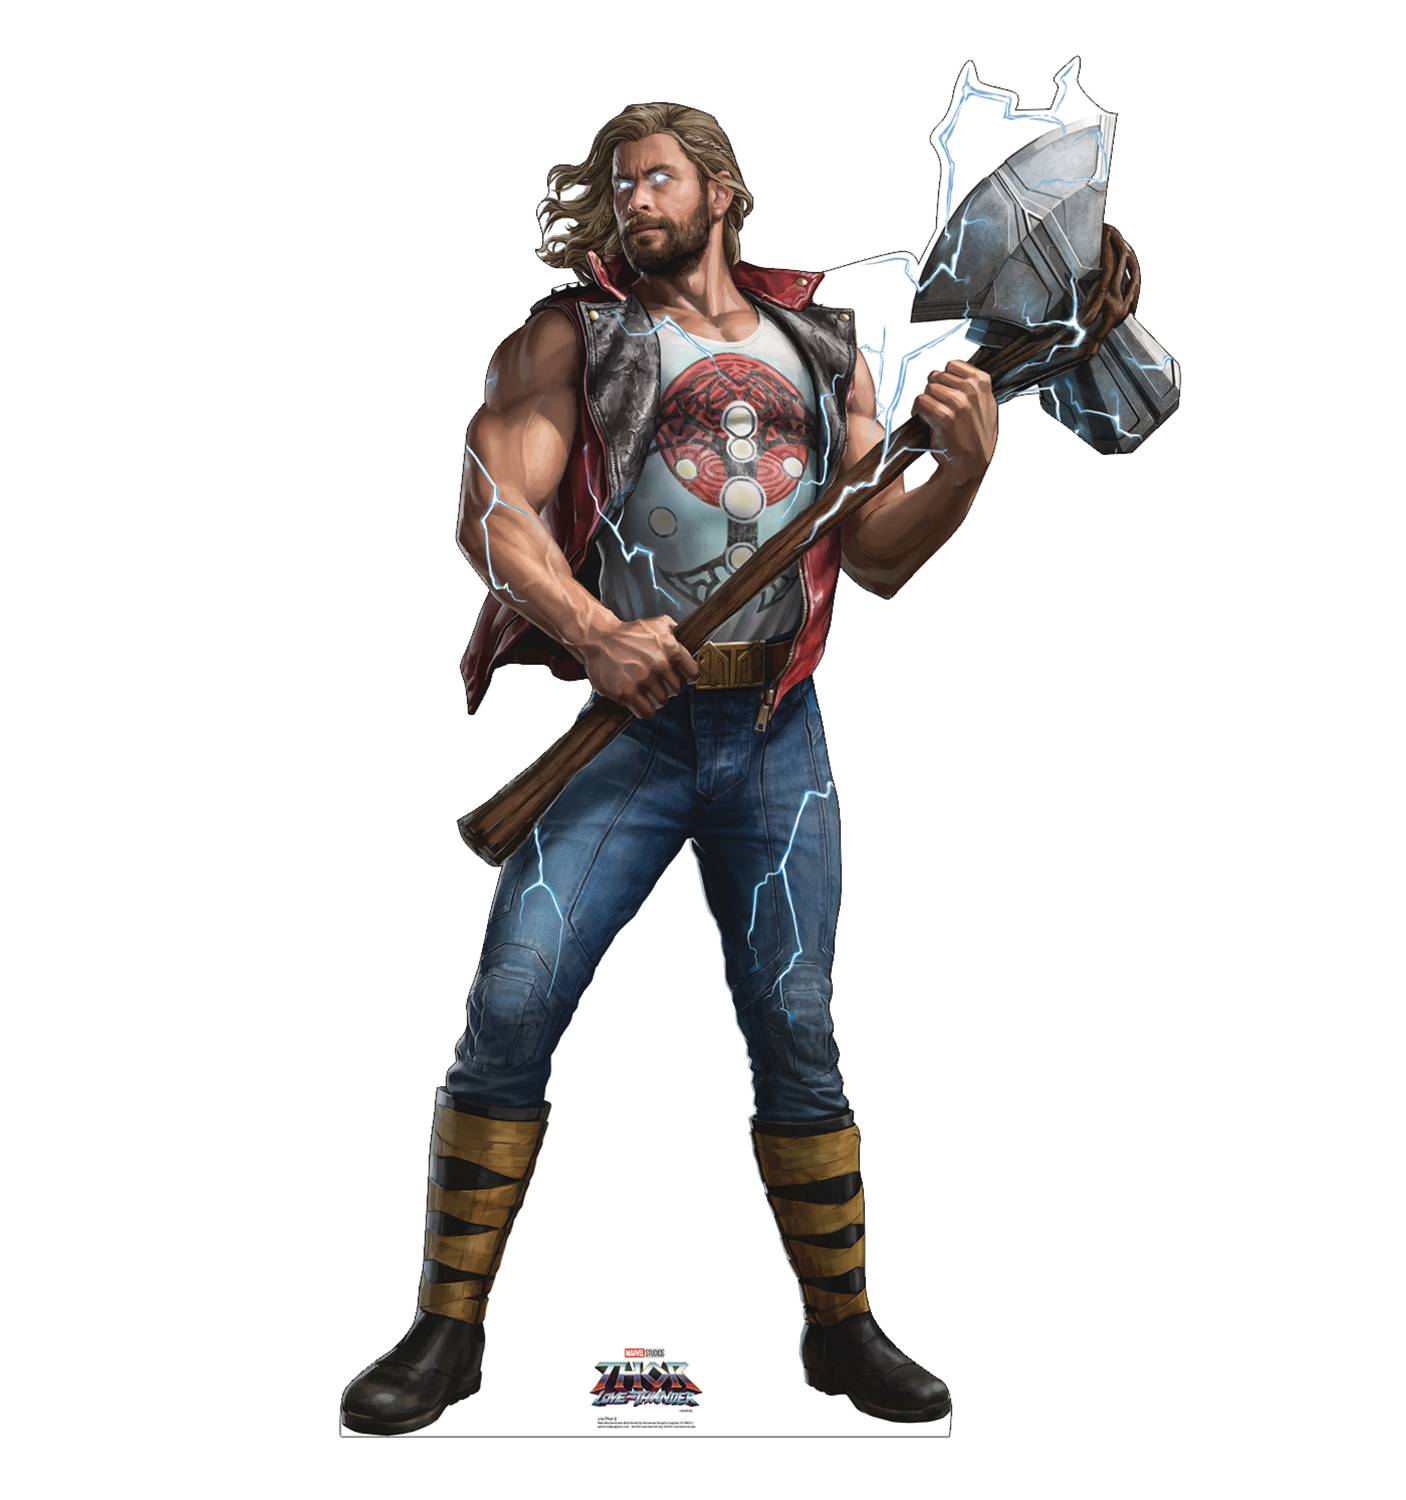 THOR LOVE AND THUNDER THOR 2 LIFE SIZE STANDEE